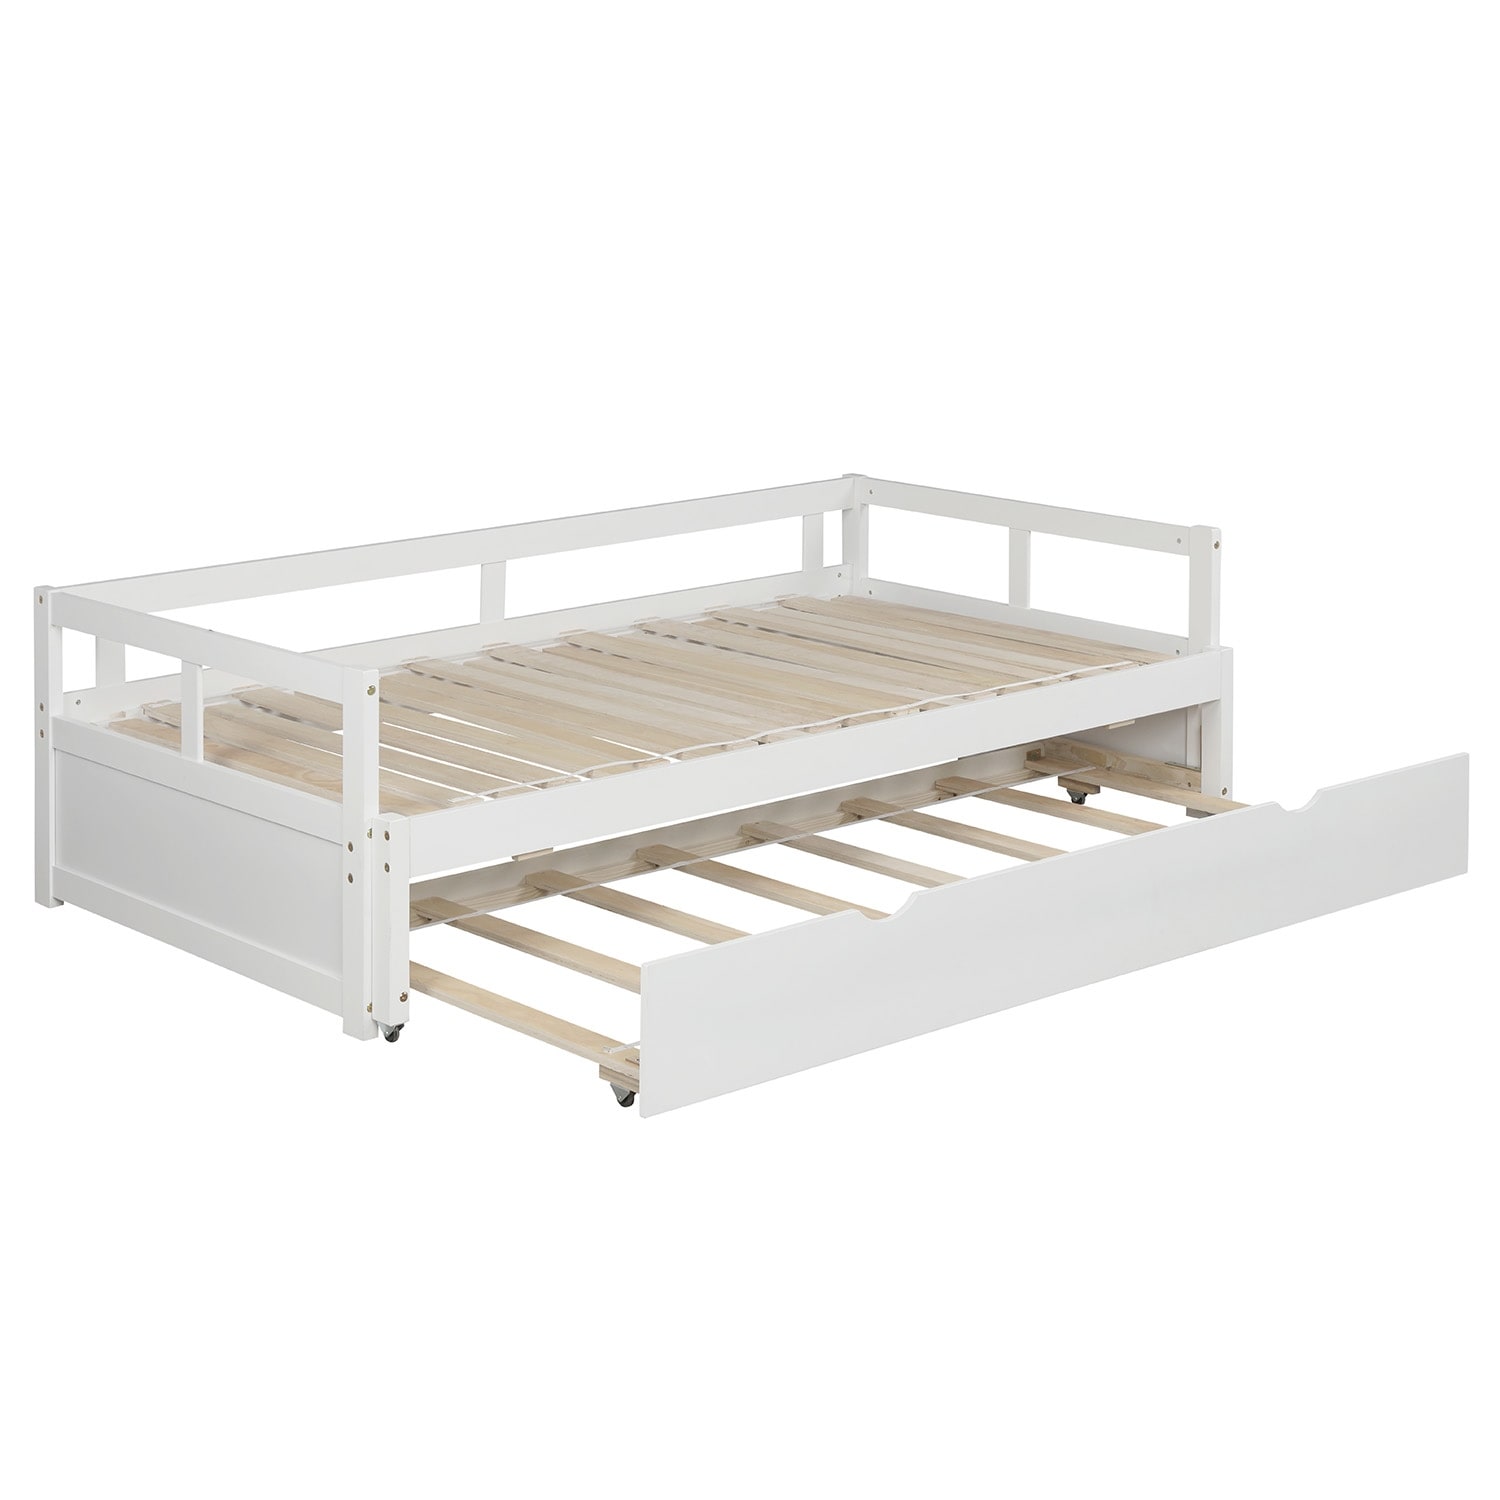 78"LWooden Daybed with Trundle,Extending Daybed